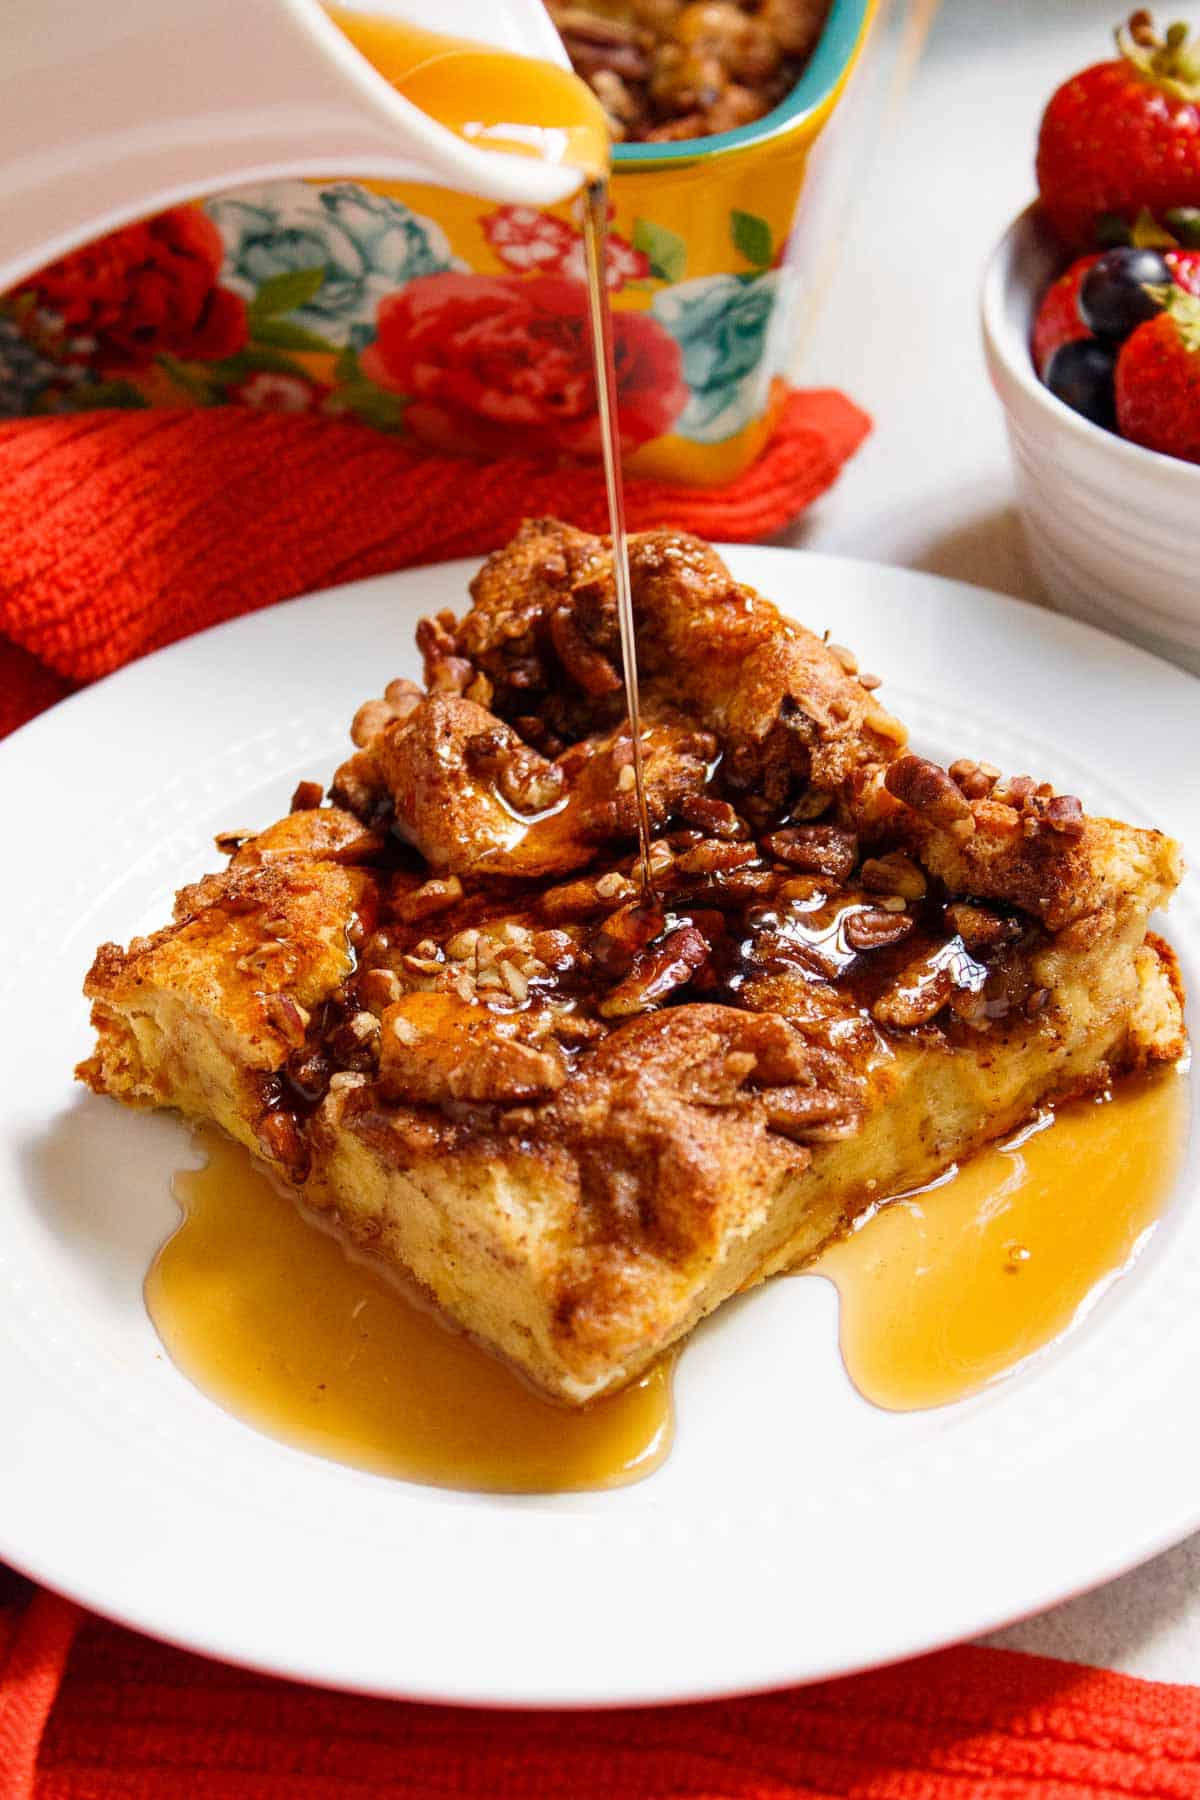 Maple syrup poured over French toast casserole slice.